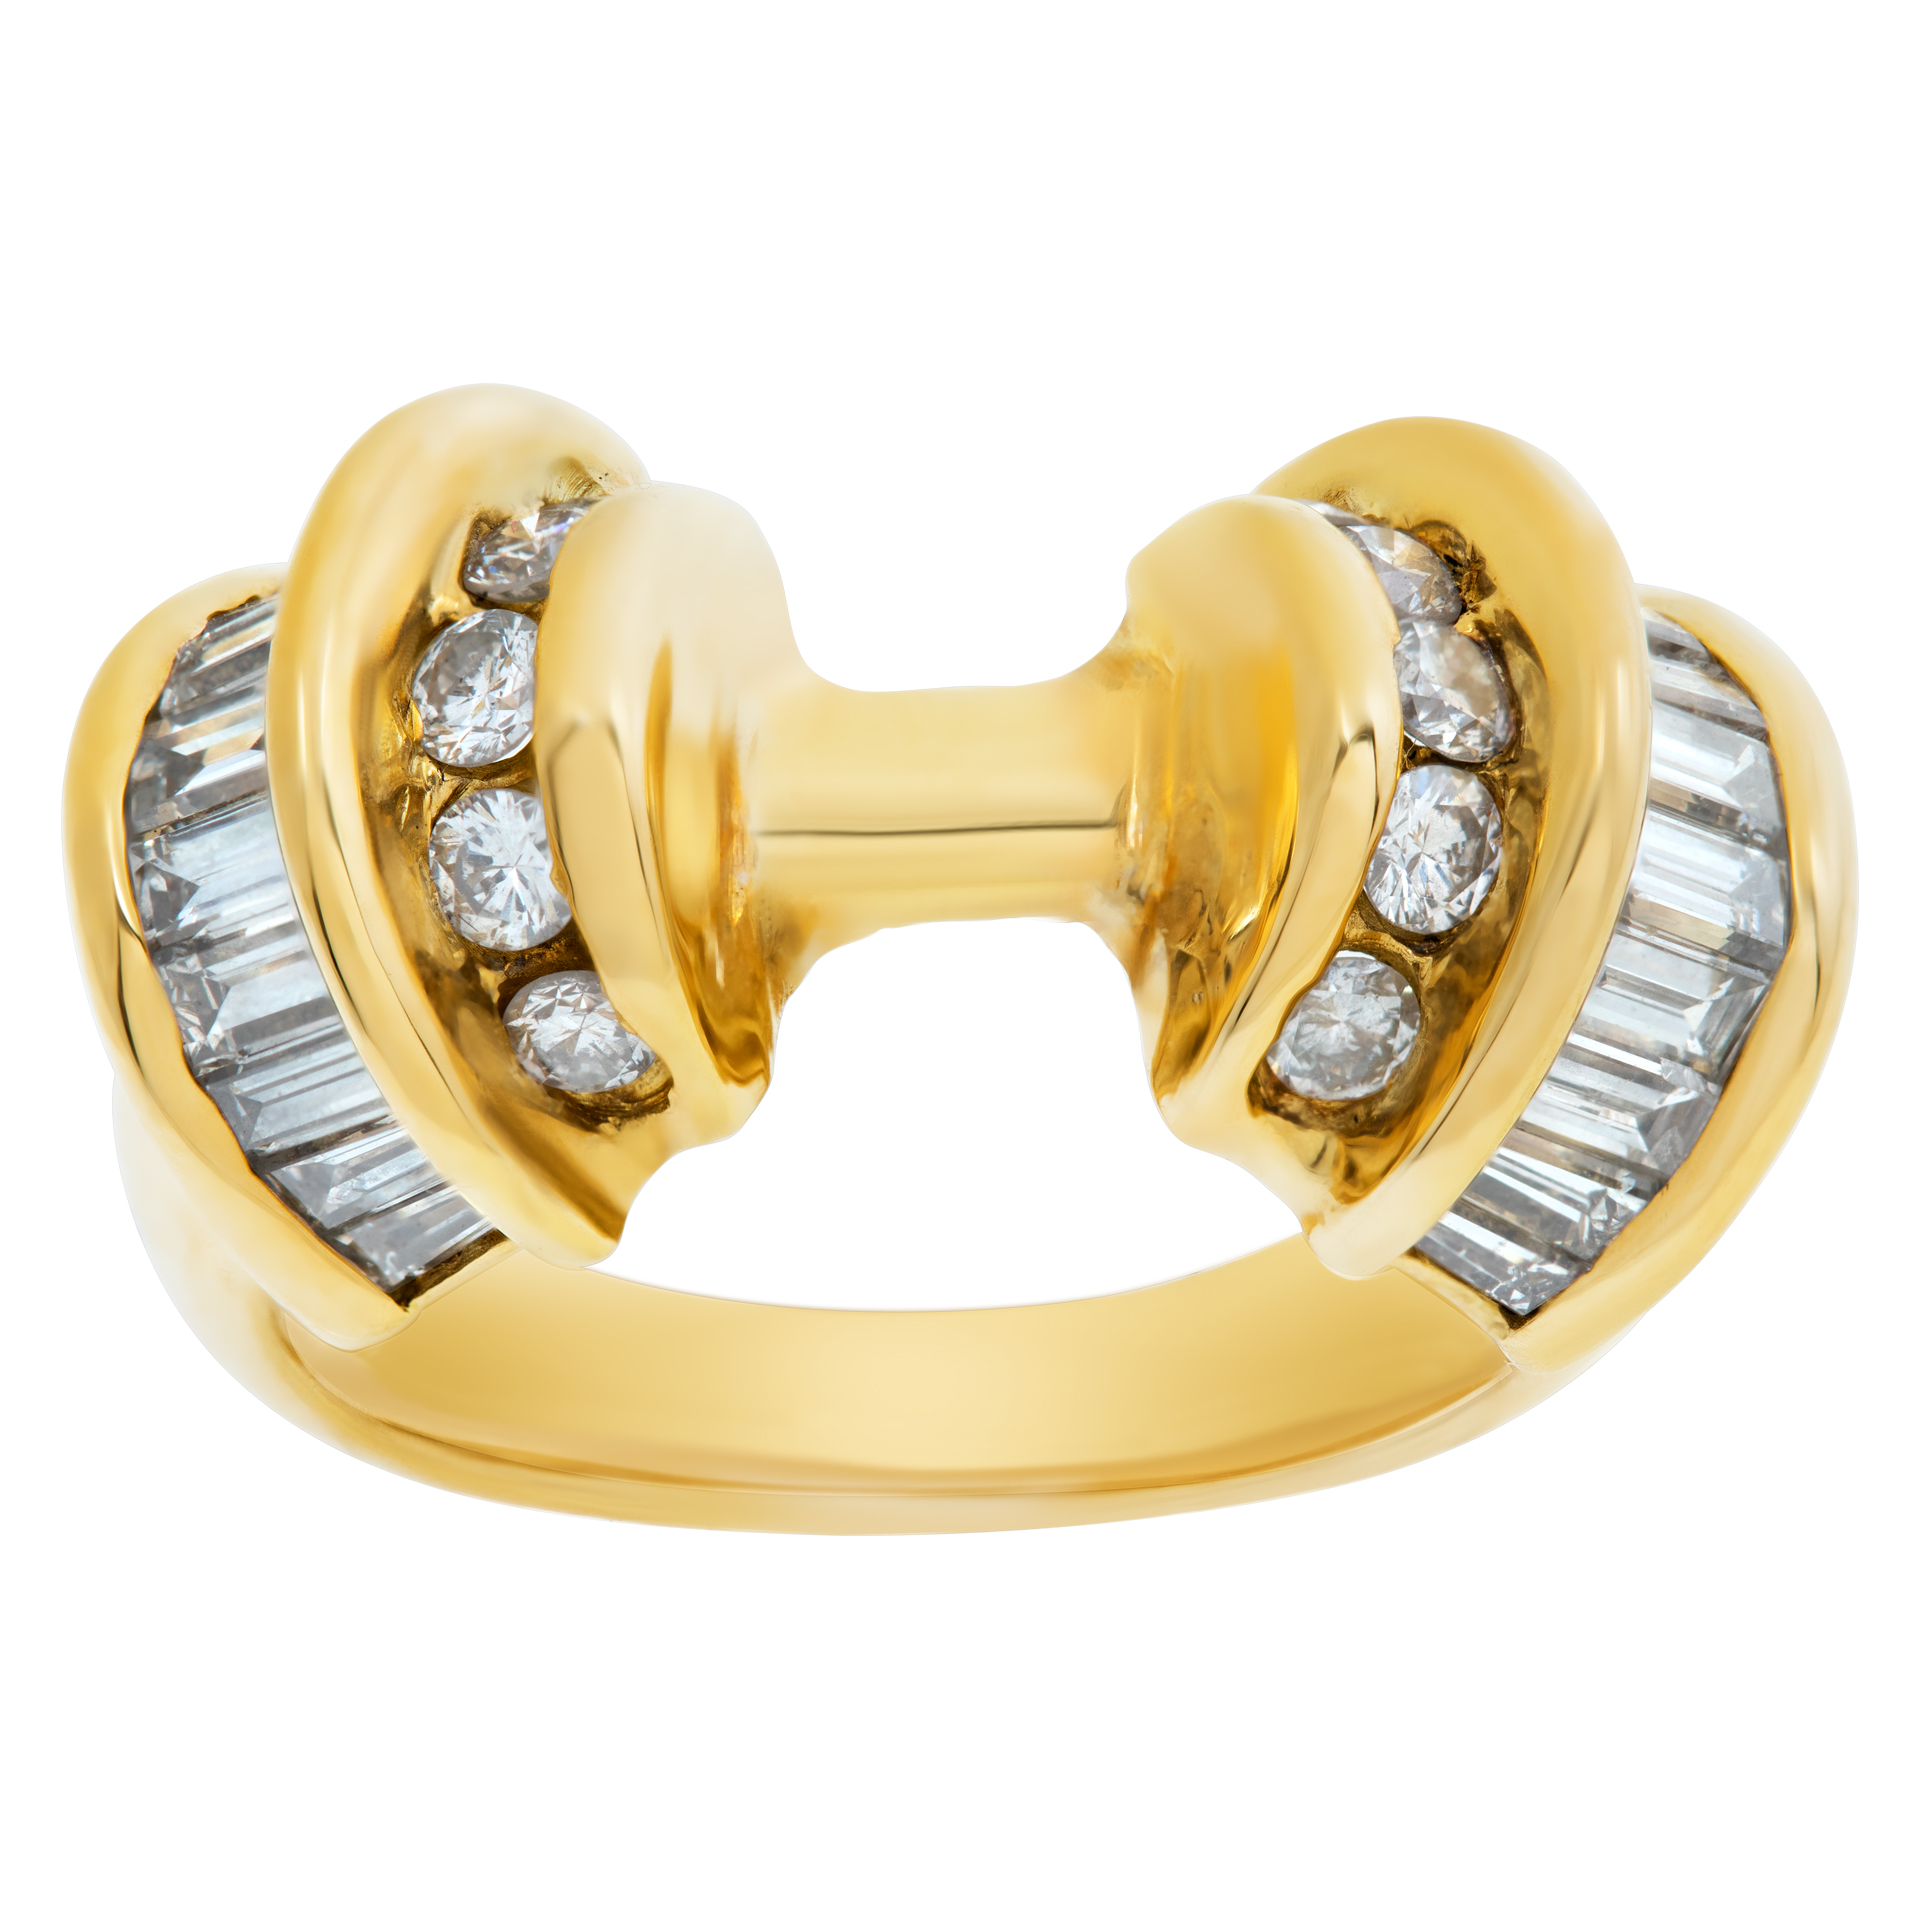 18k yellow gold ring. 0.25cts round diamonds & 0.40cts in baguette diamonds